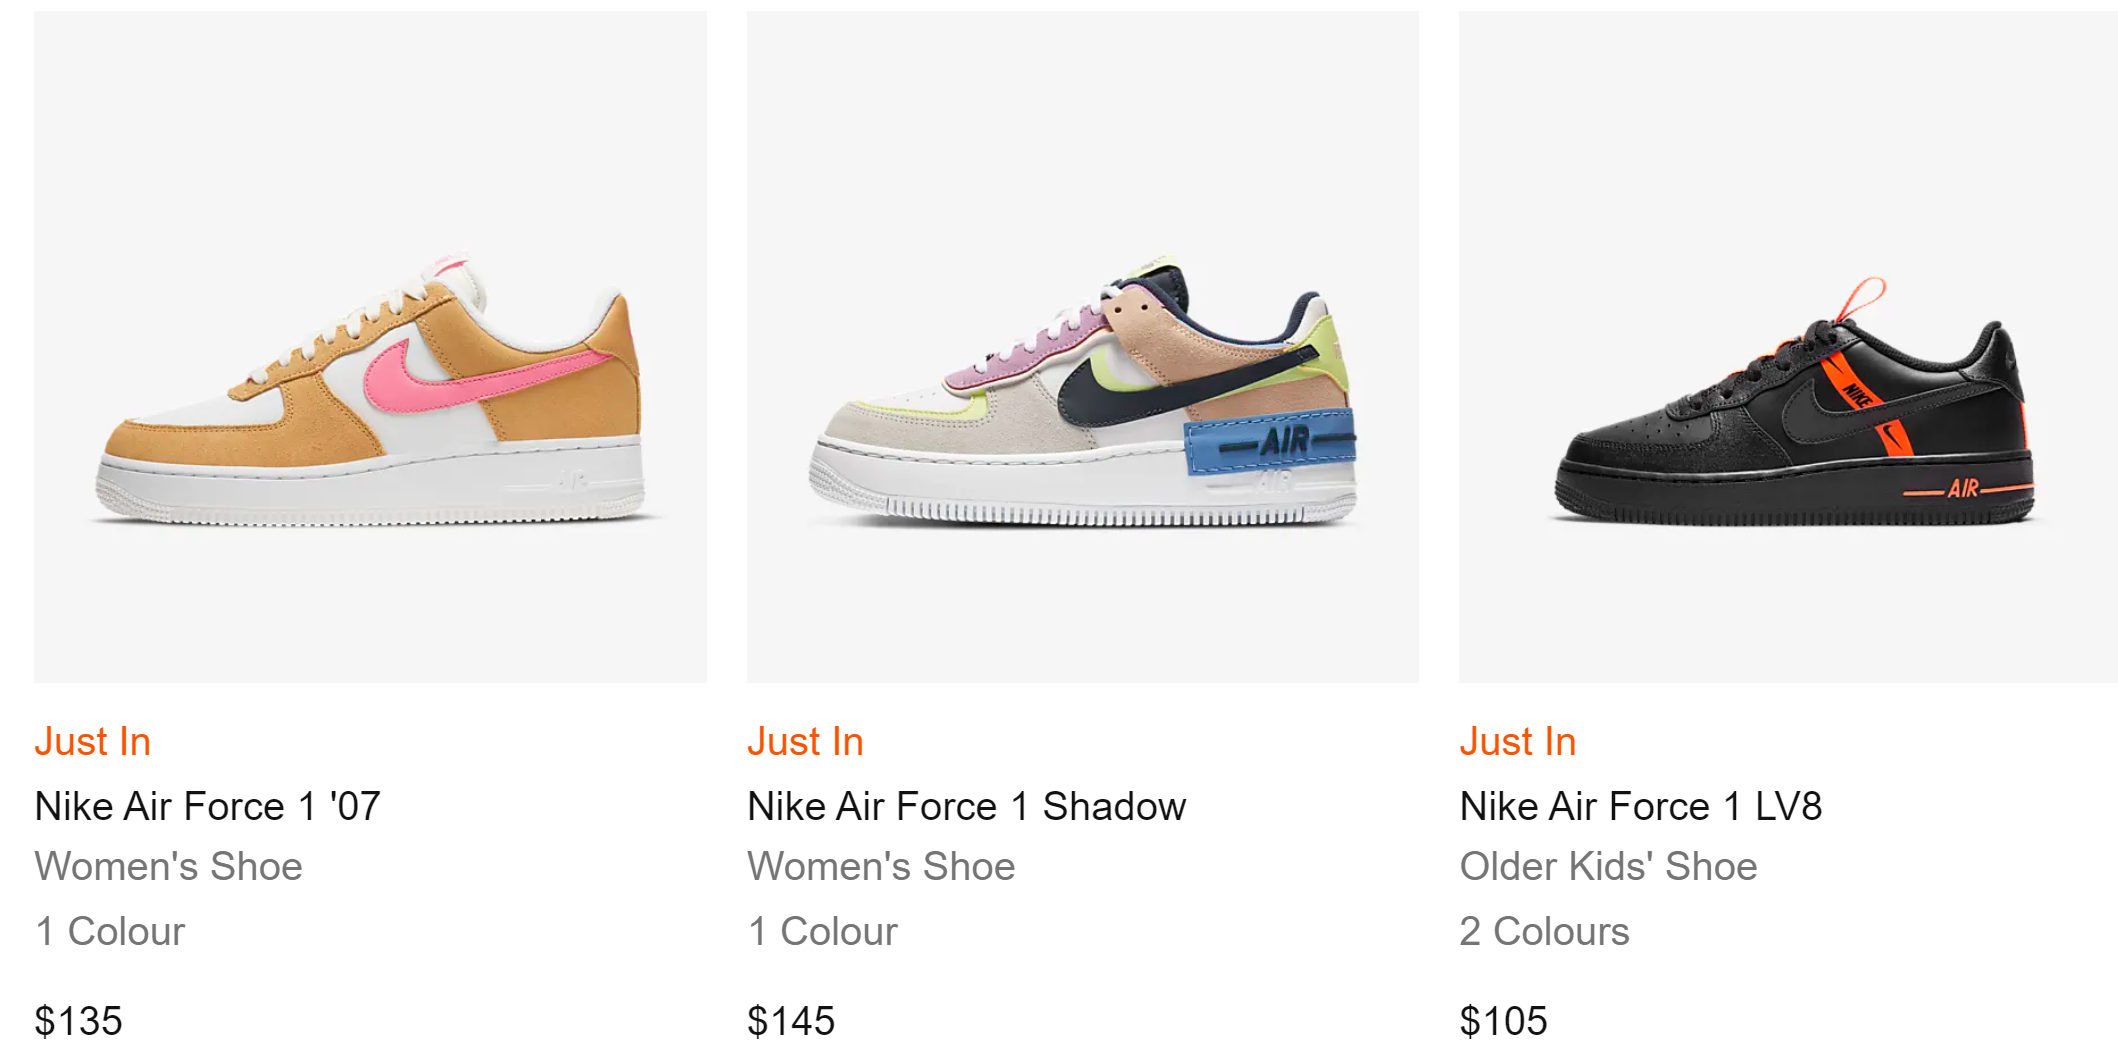 nikes-official-website-for-men-and-women-blasts-air-force-1-zone-from-120-2020-10-23